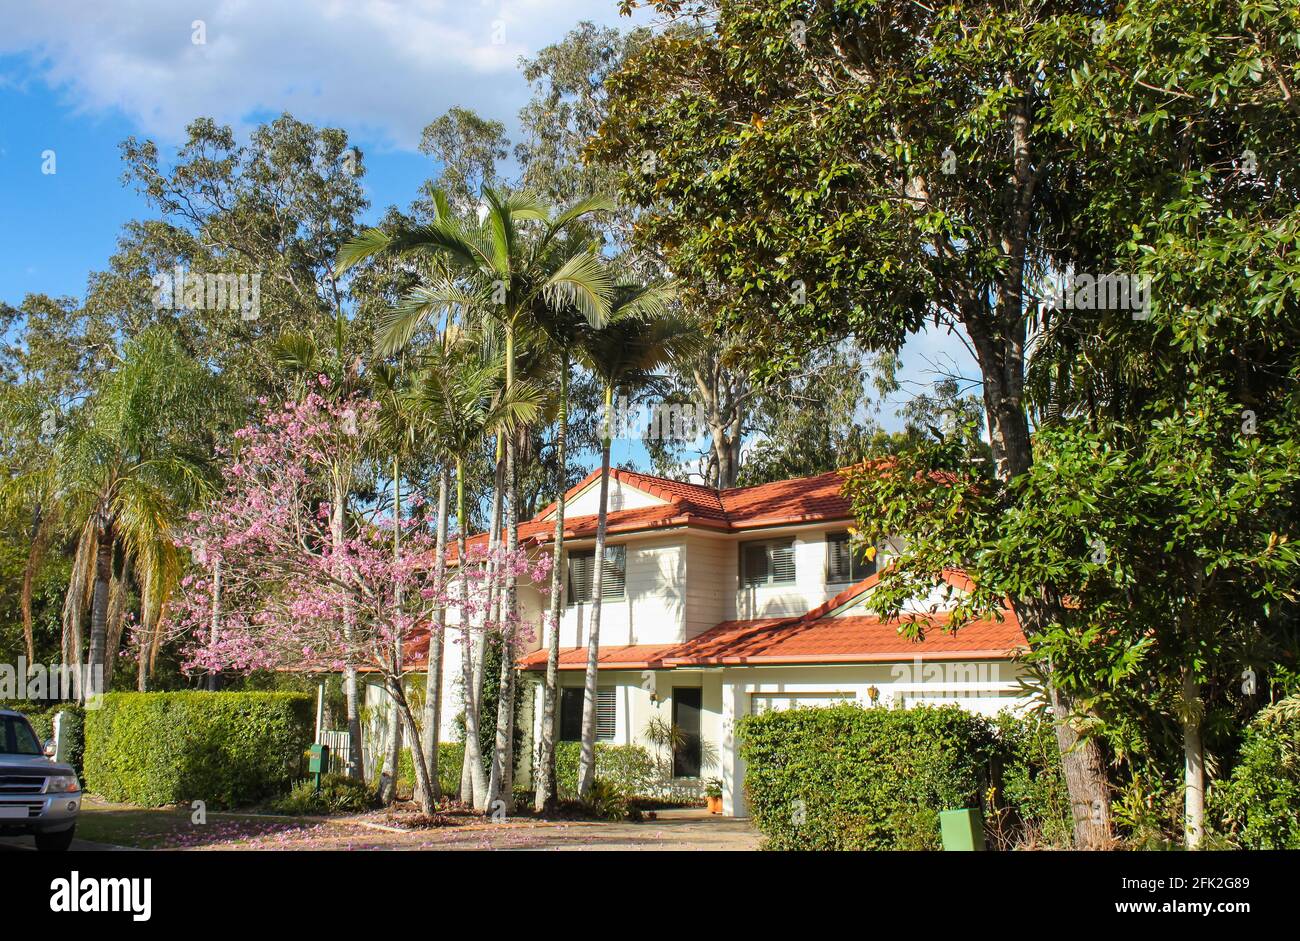 Upscale white Australian house with tile roof and palm trees and pink flowering tree in front - tall gum trees behind Stock Photo